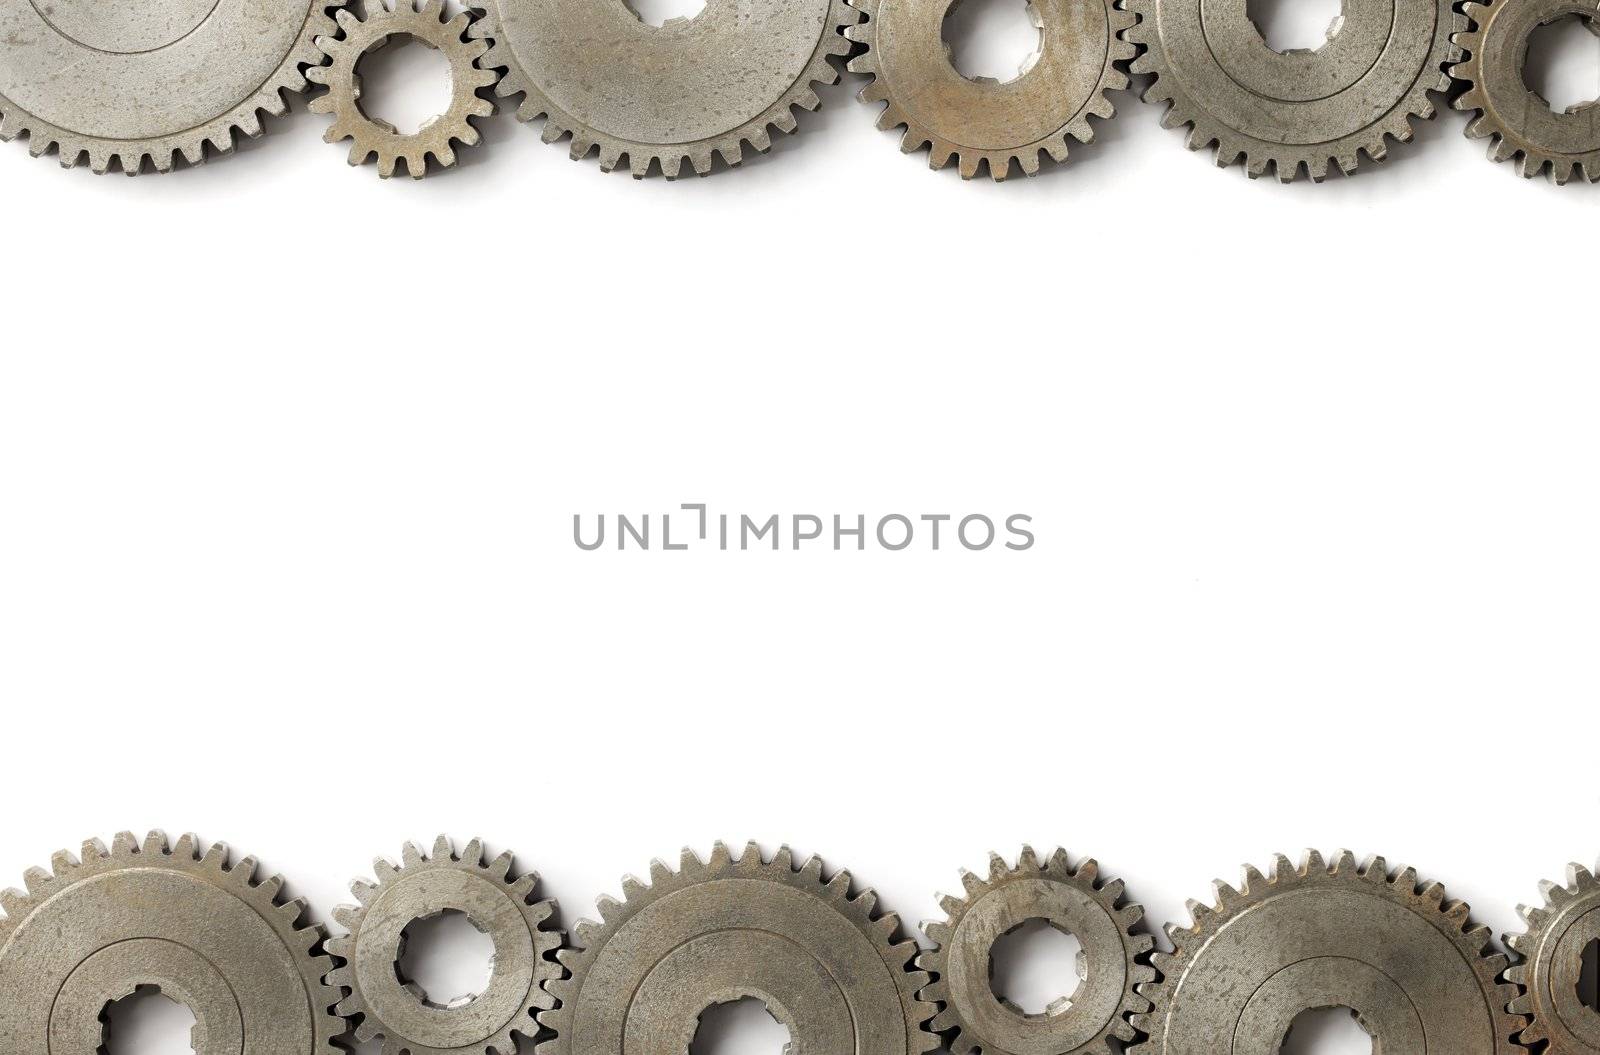 Gear background by Stocksnapper